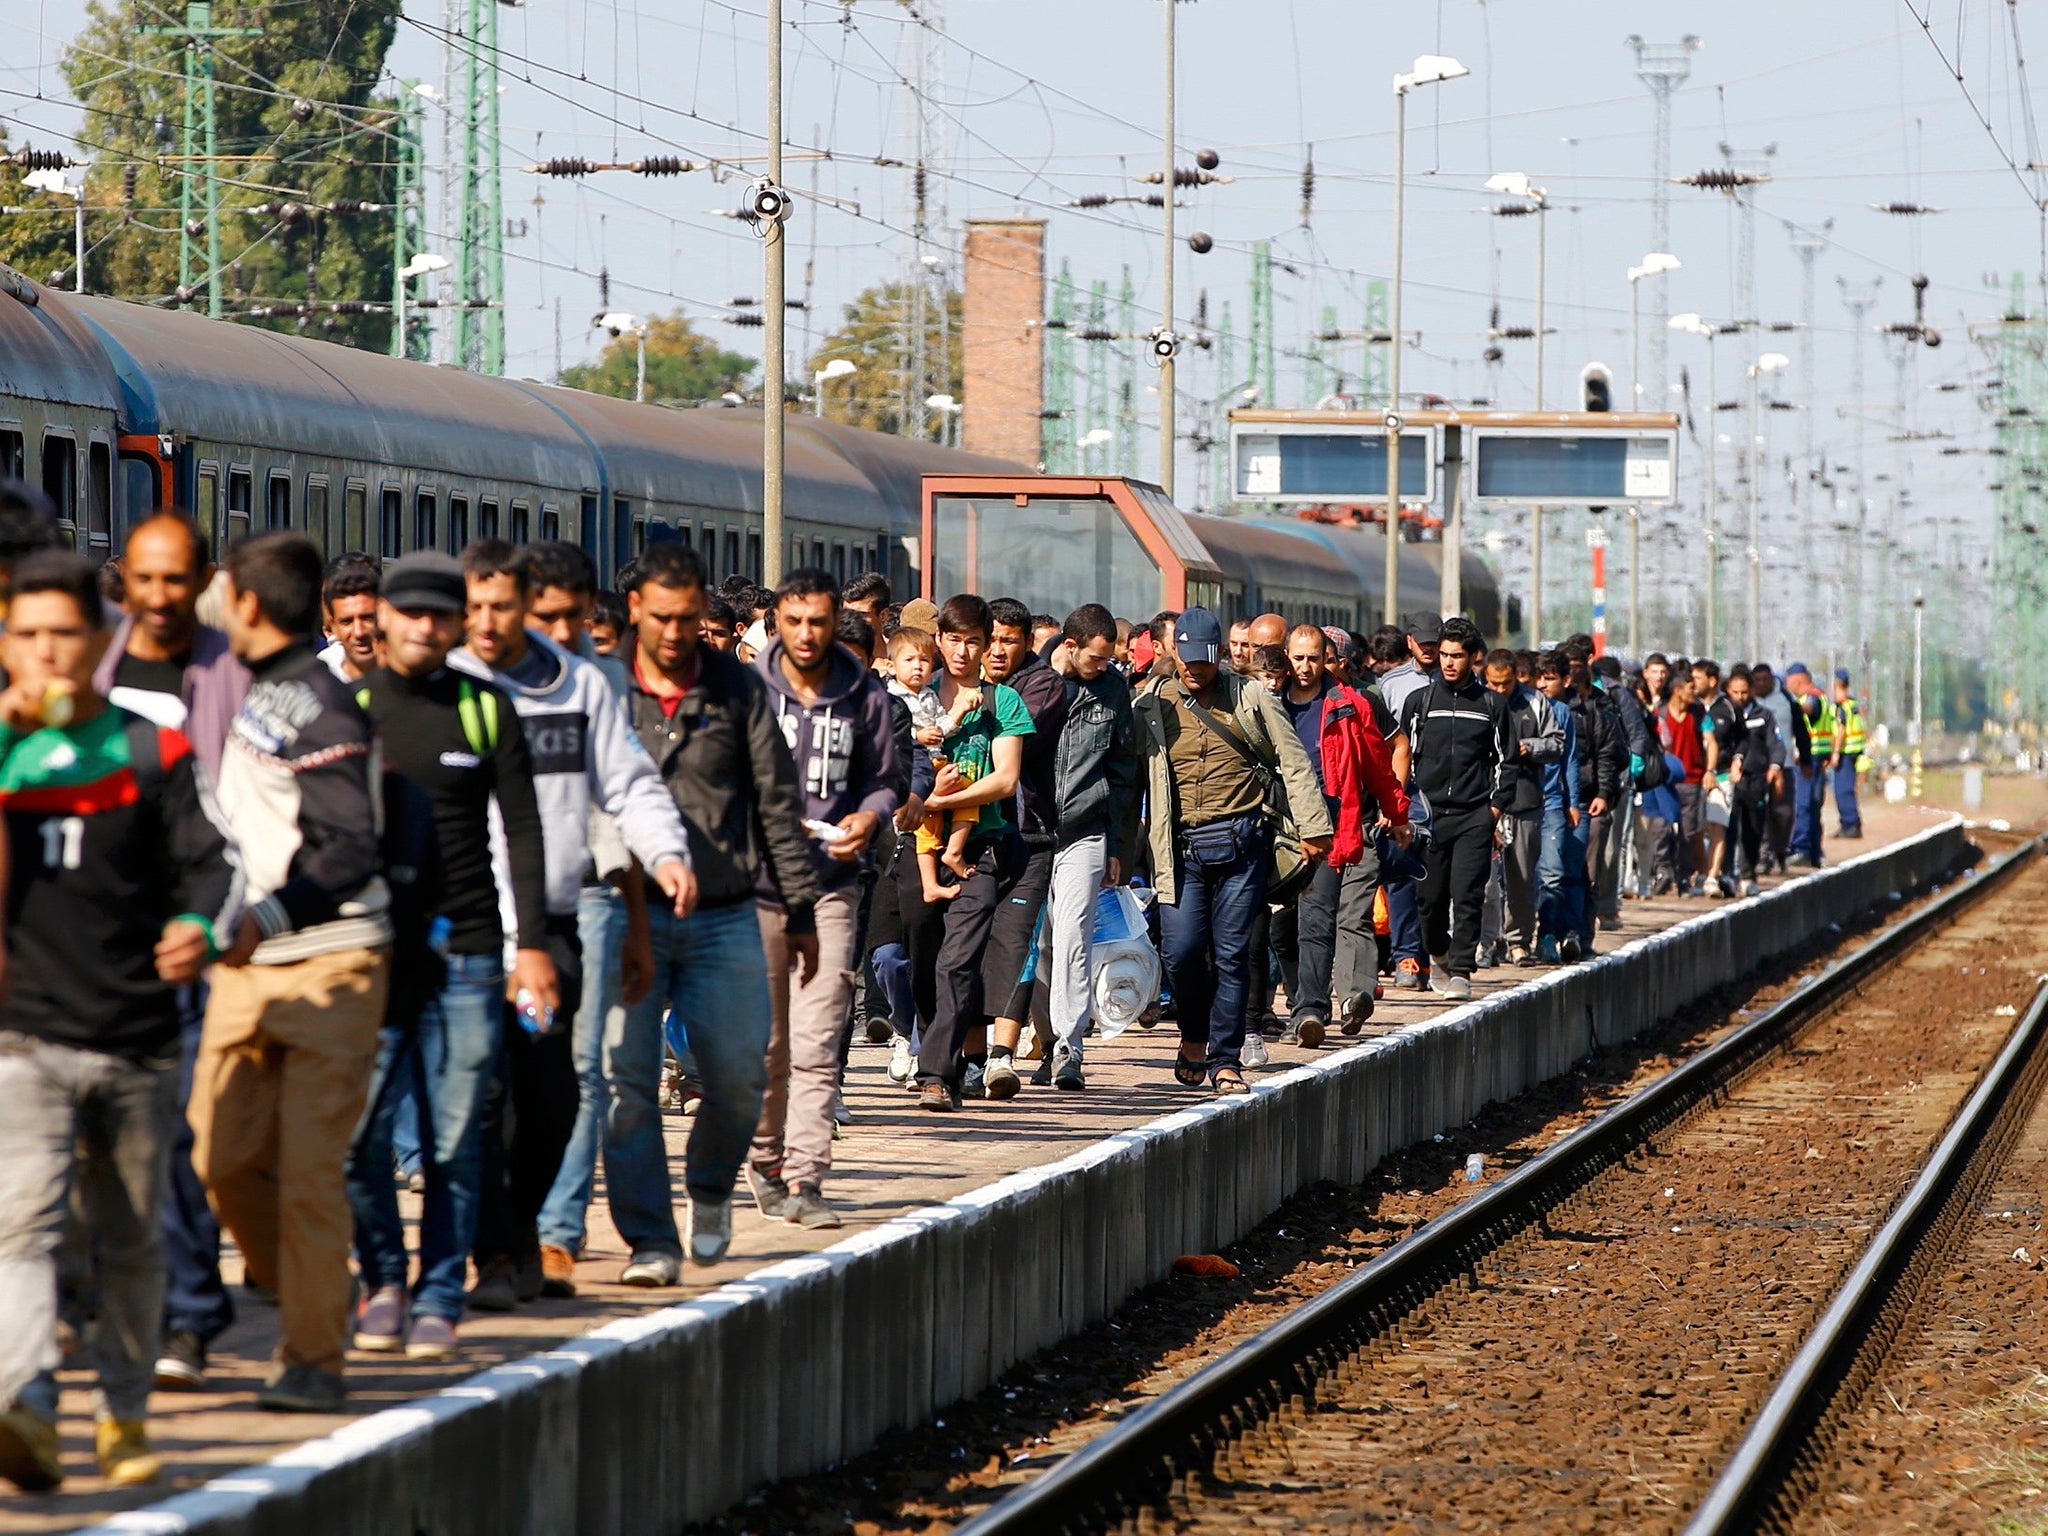 Refugees walk along a railway platform after they arrived by train in Hegyeshalom, Hungary